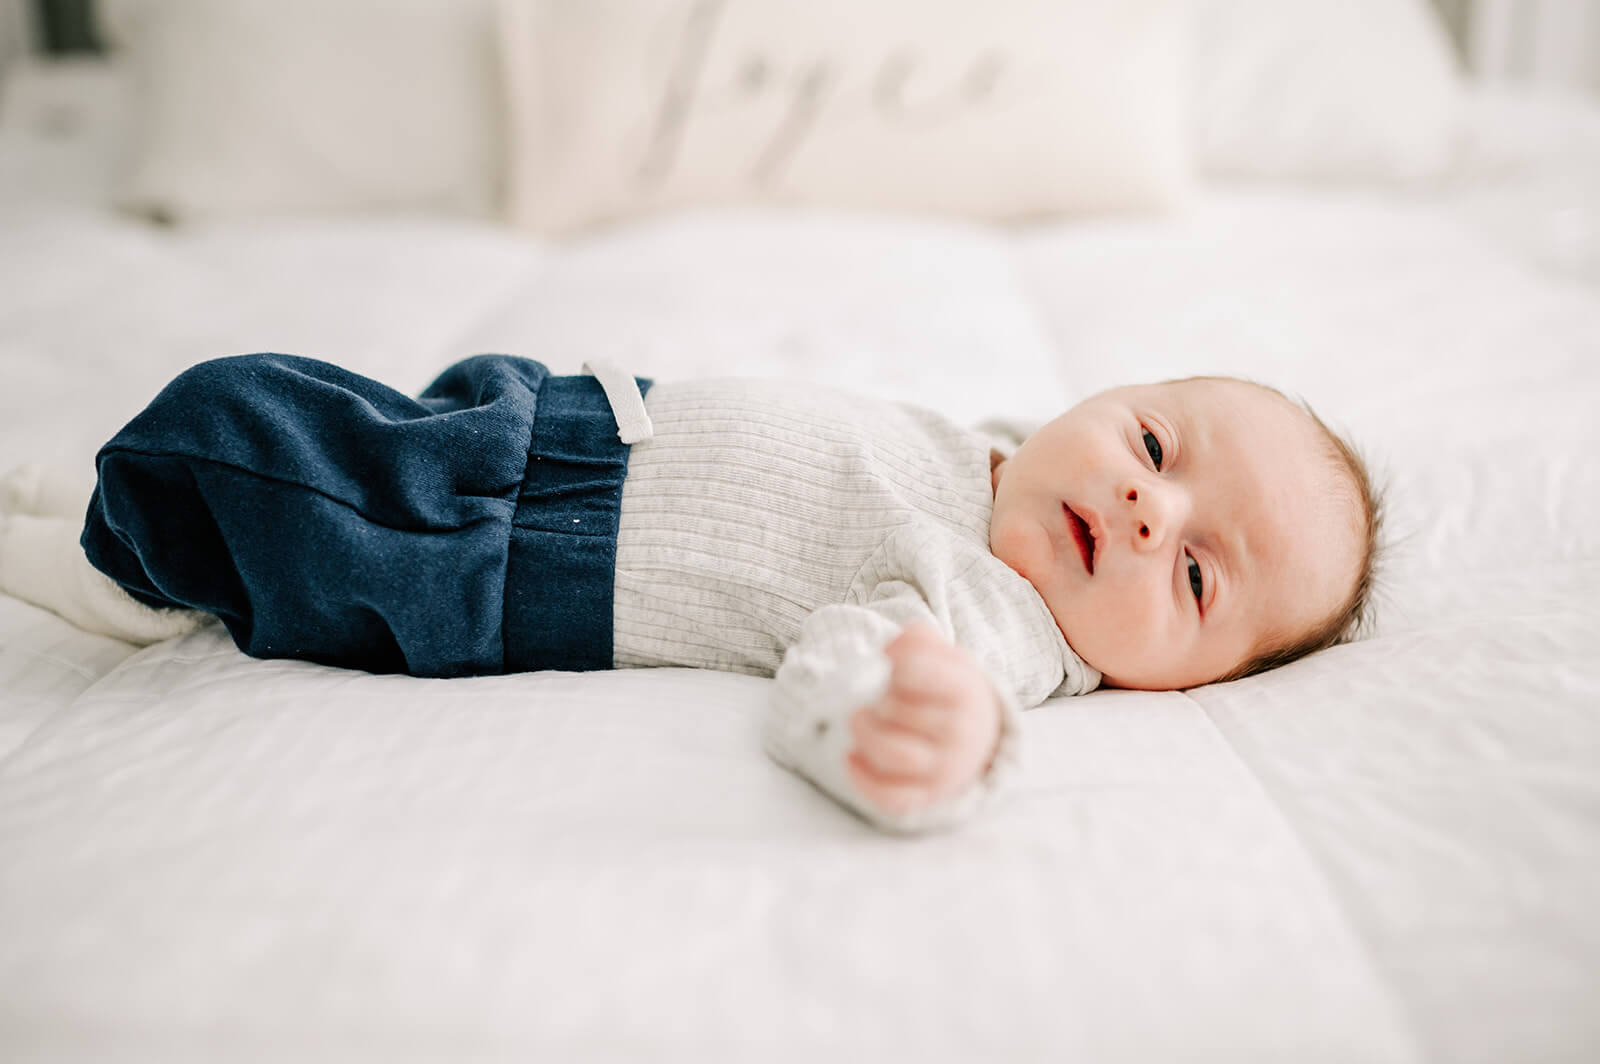 A newborn baby boy in a grey sweater and blue pants lays on a bed with eyes barely open